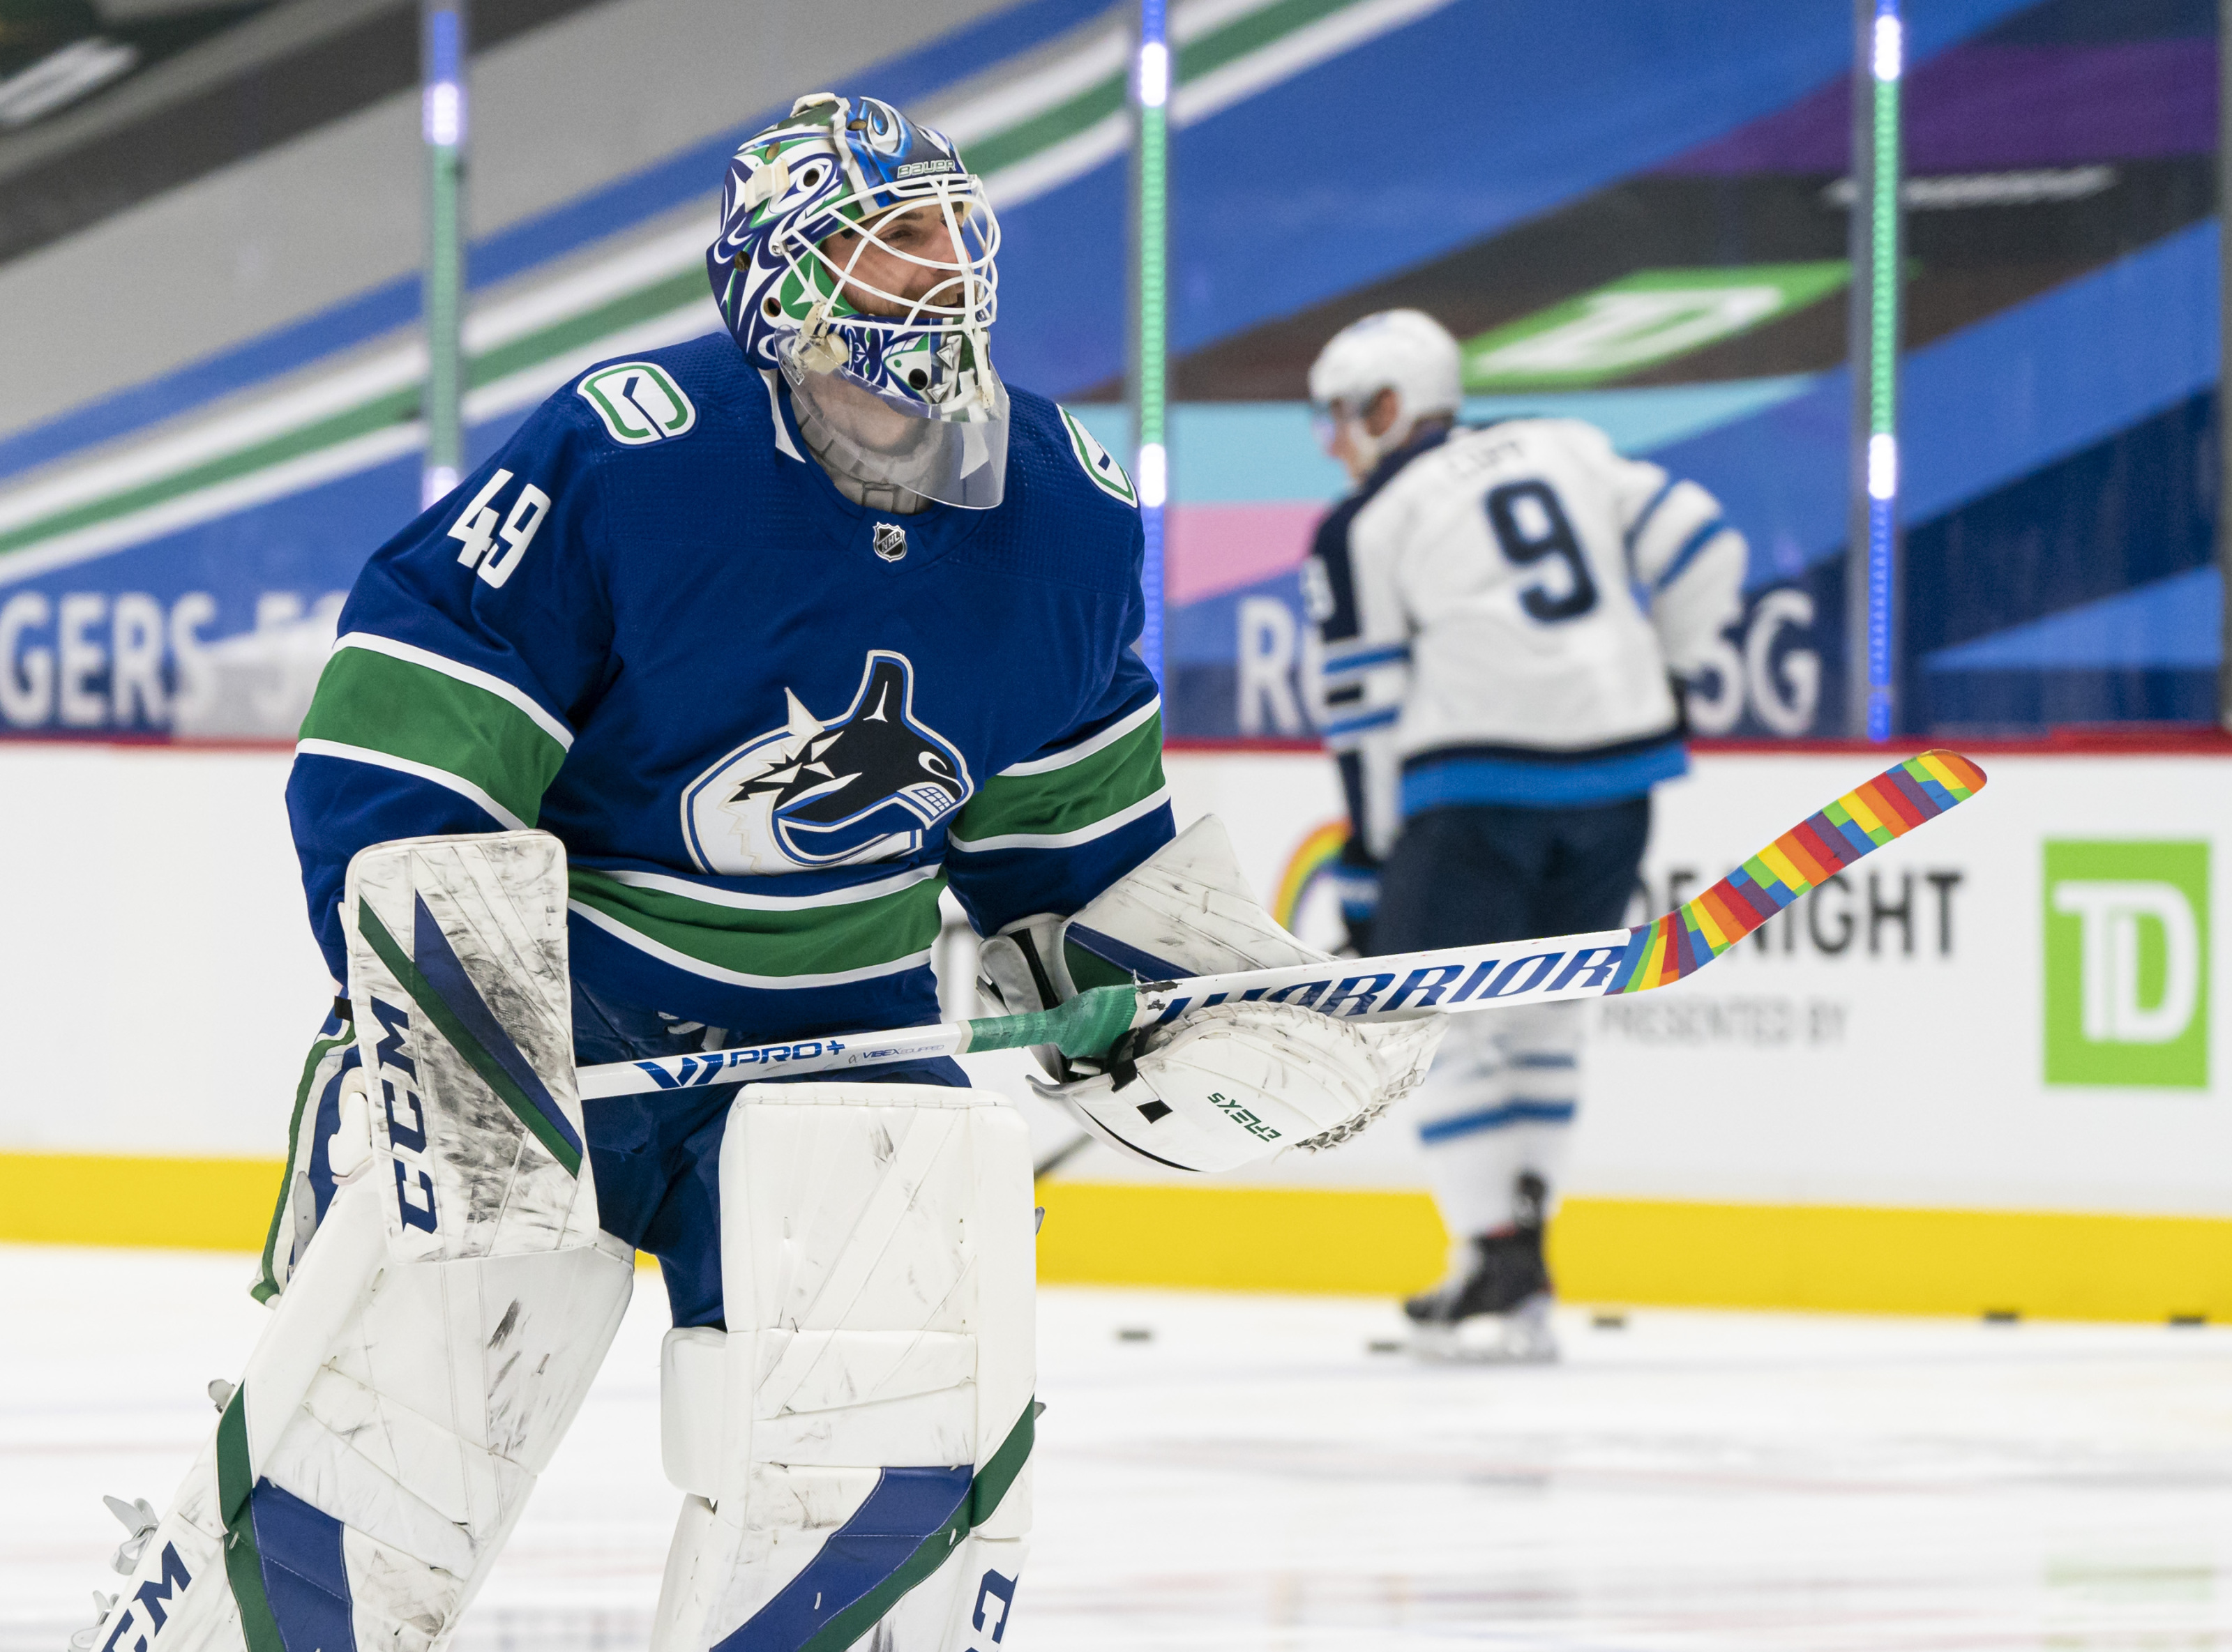 Braden Holtby to wear number 49 for Vancouver Canucks